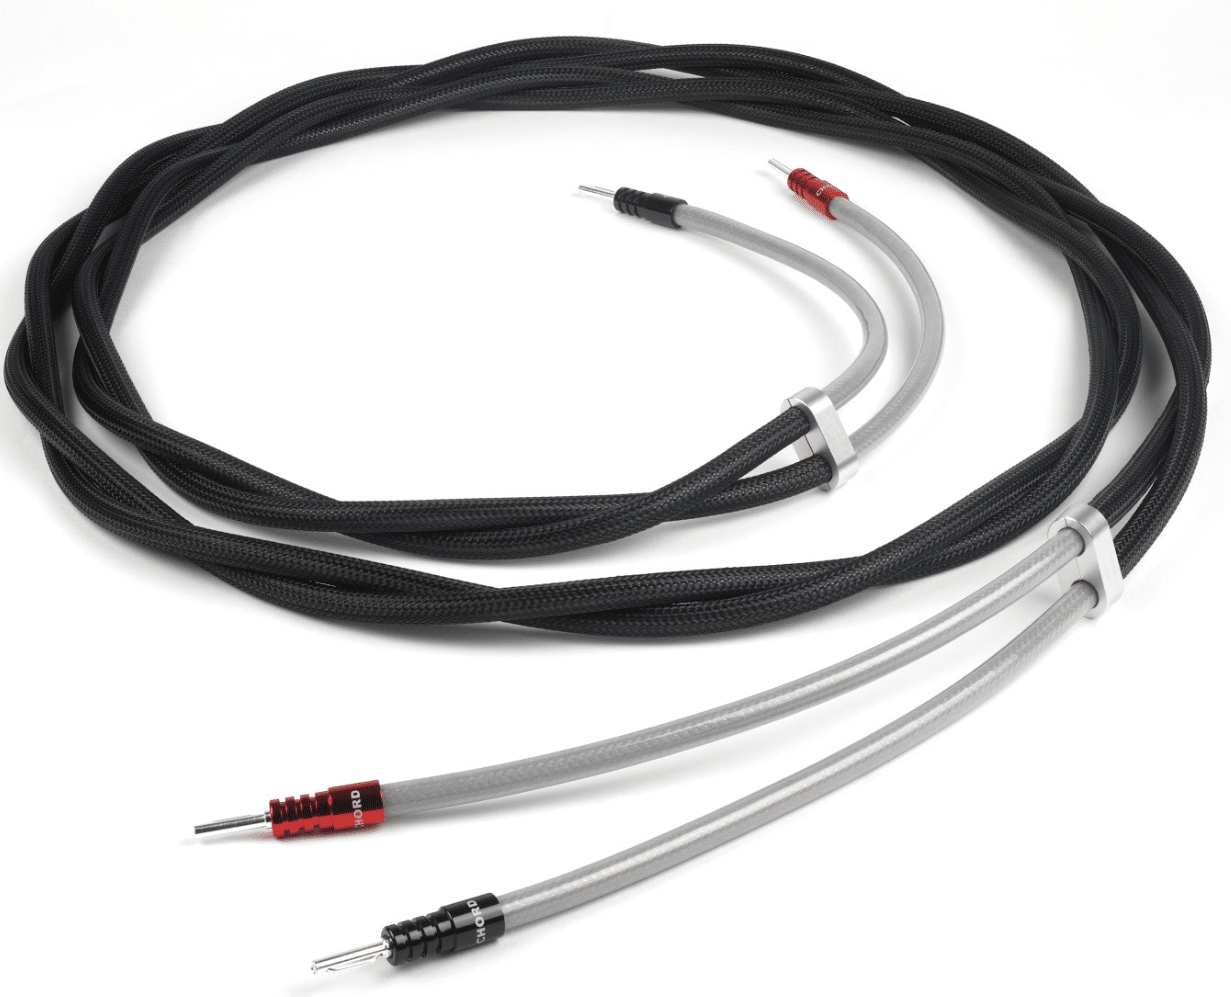 SignatureXL cable and ChordOhmic plugs From Chord Company